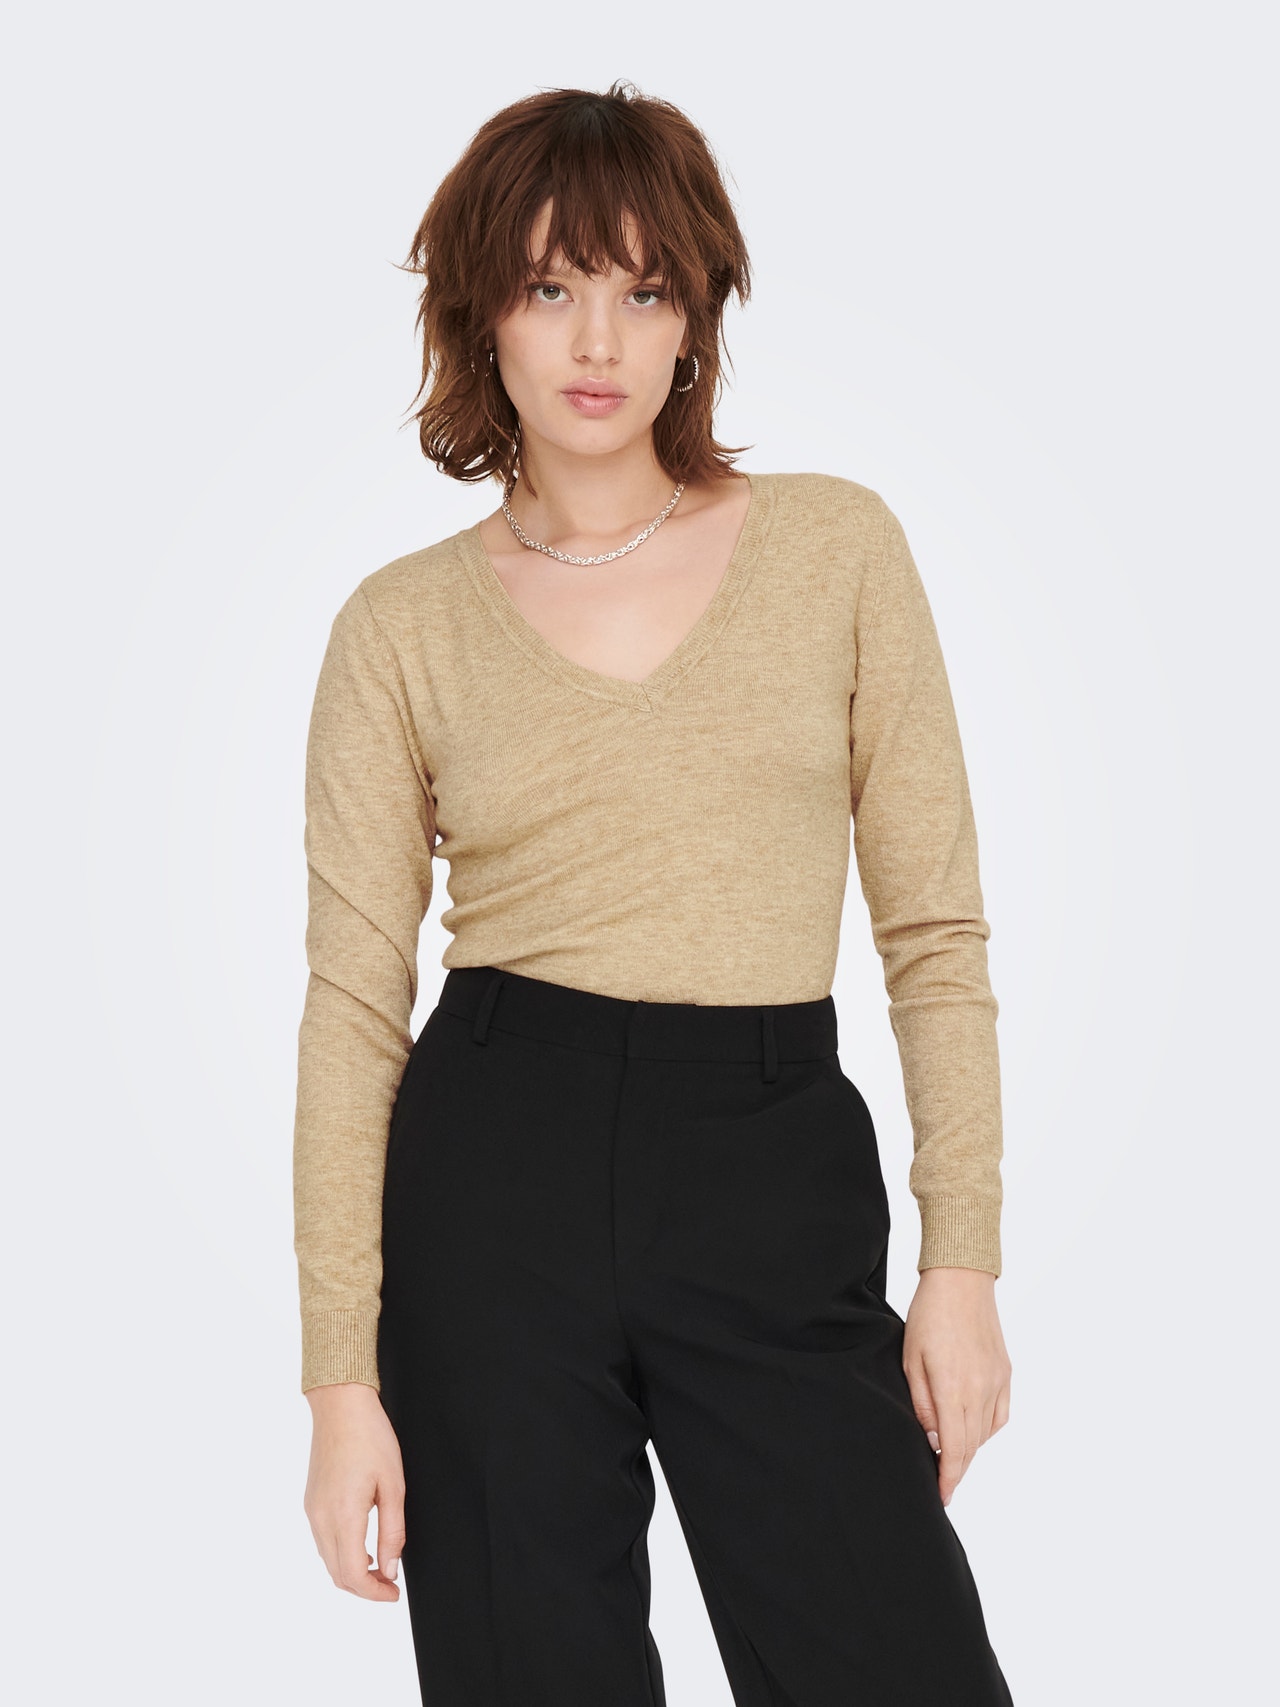 ONLY V-Hals Pullover -Toasted Coconut - 15277047